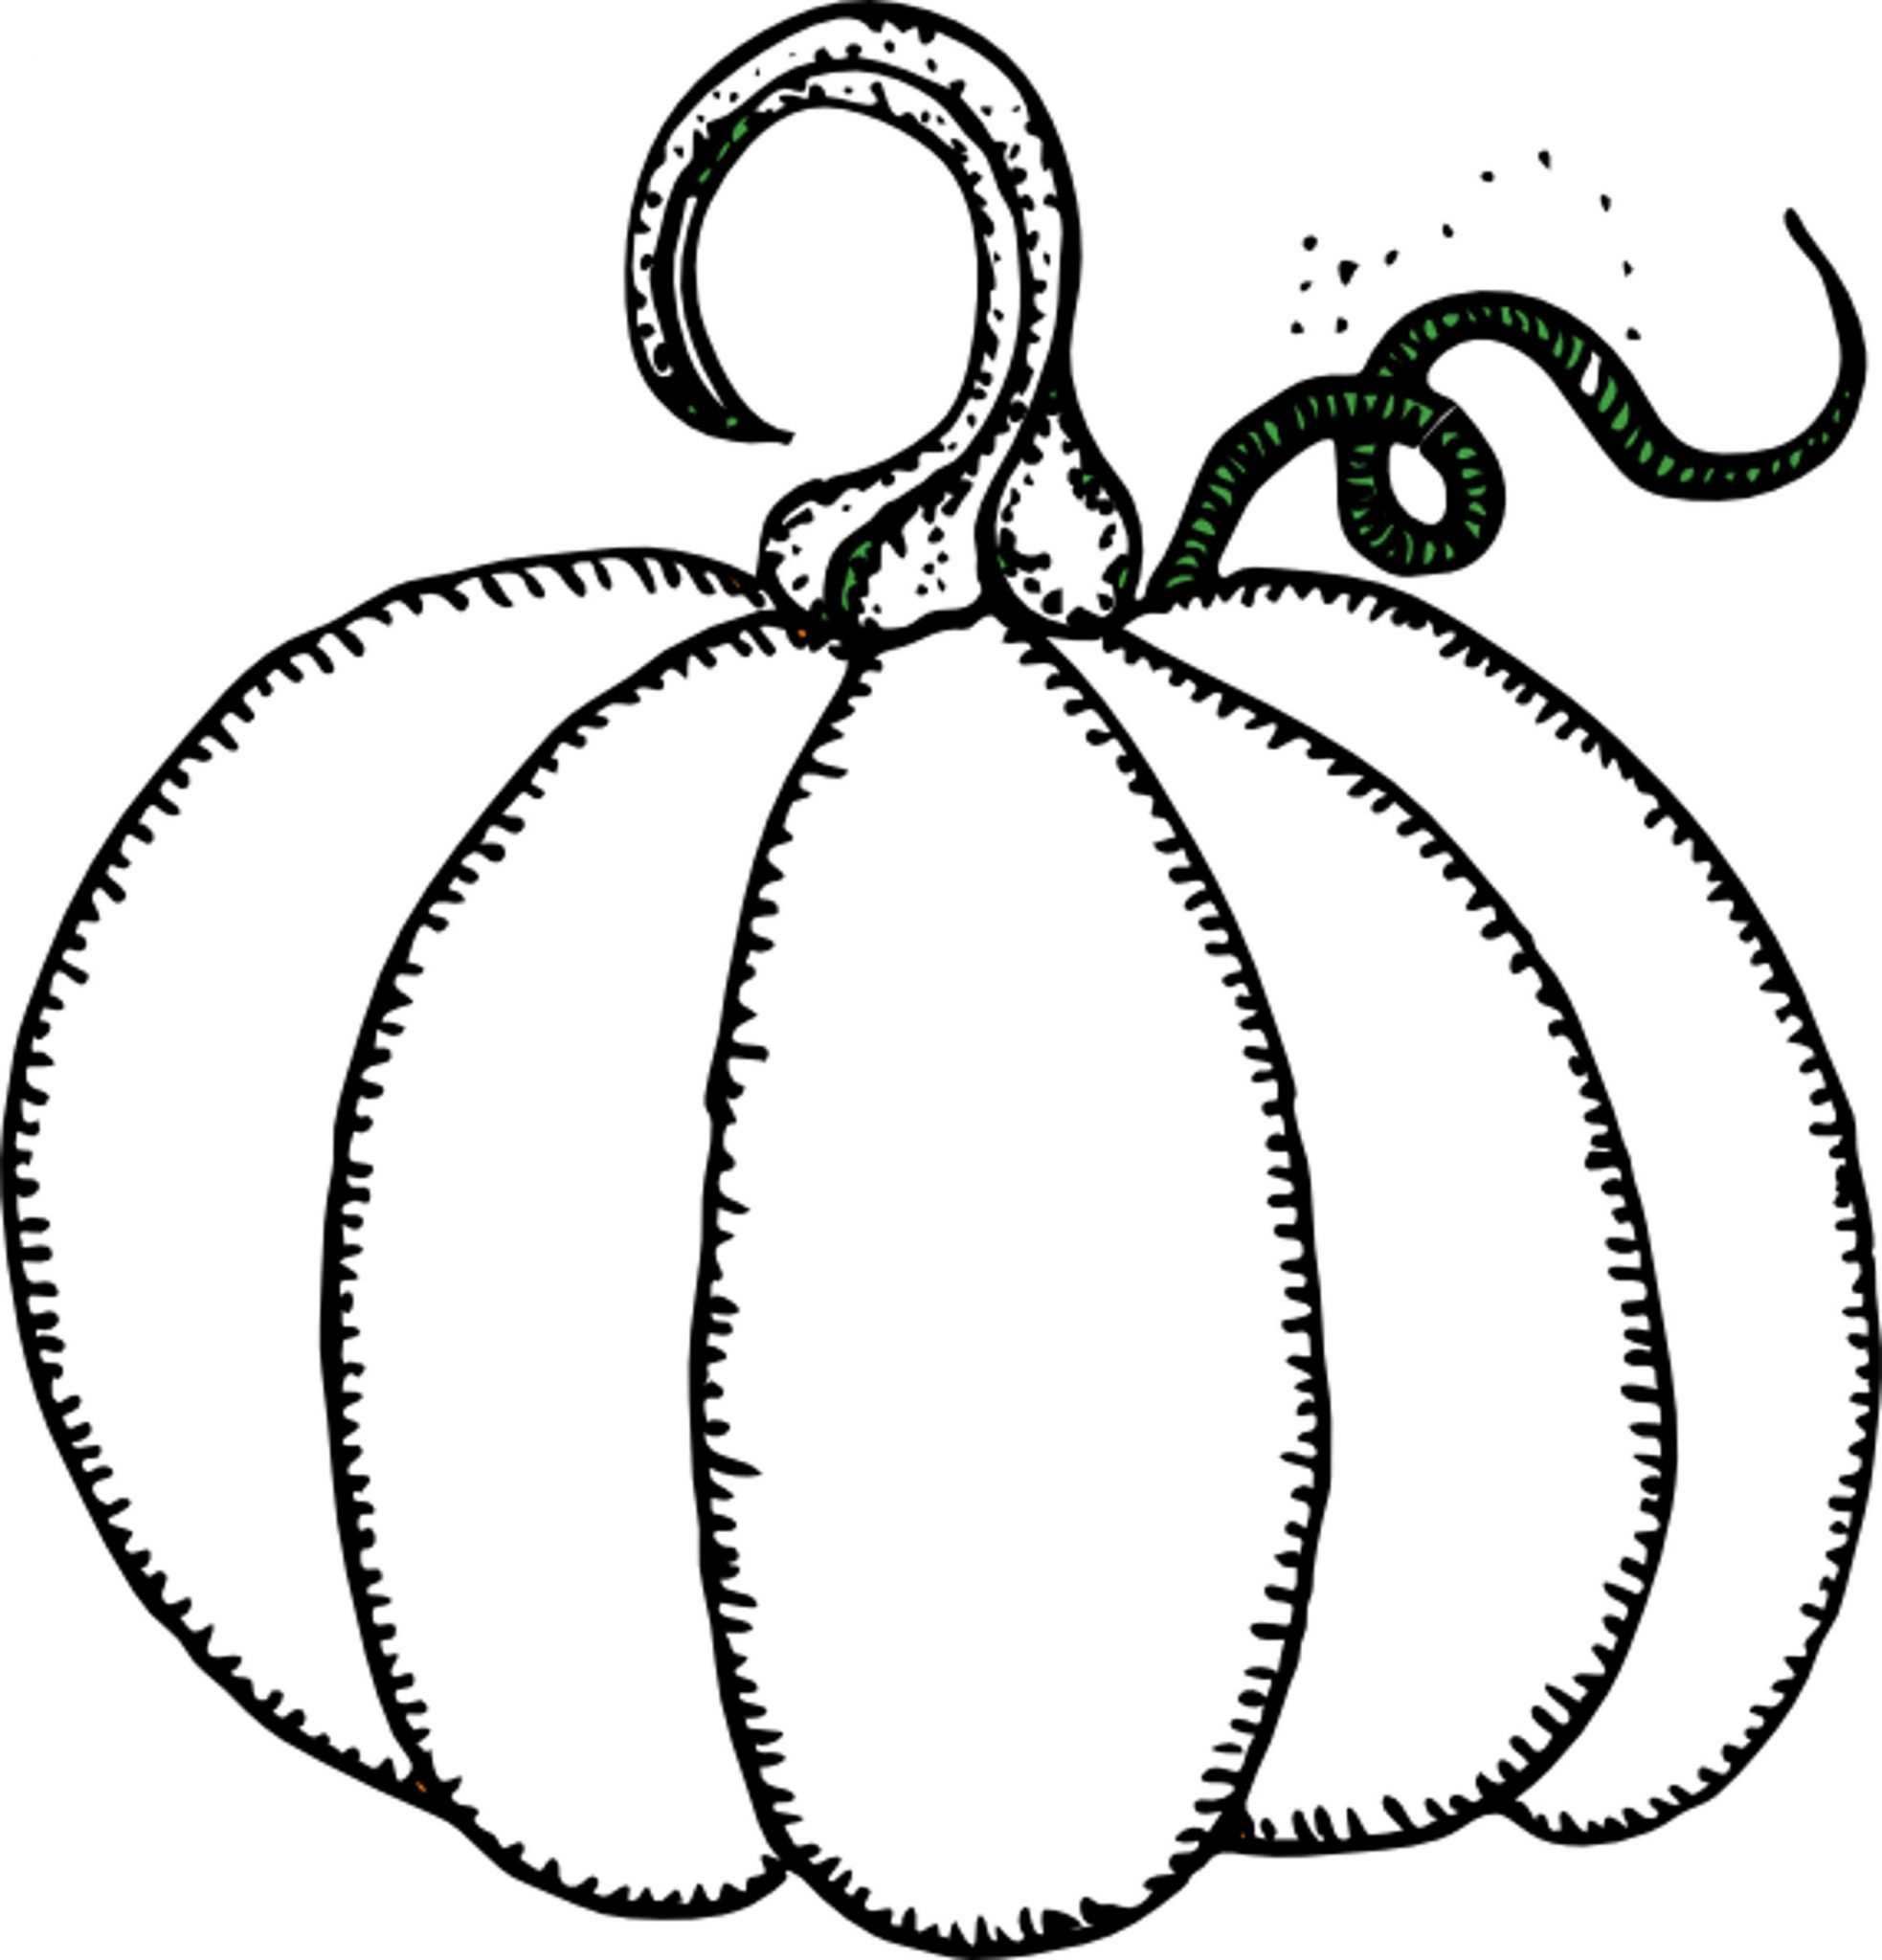 print-download-pumpkin-coloring-pages-and-benefits-of-drawing-for-kids